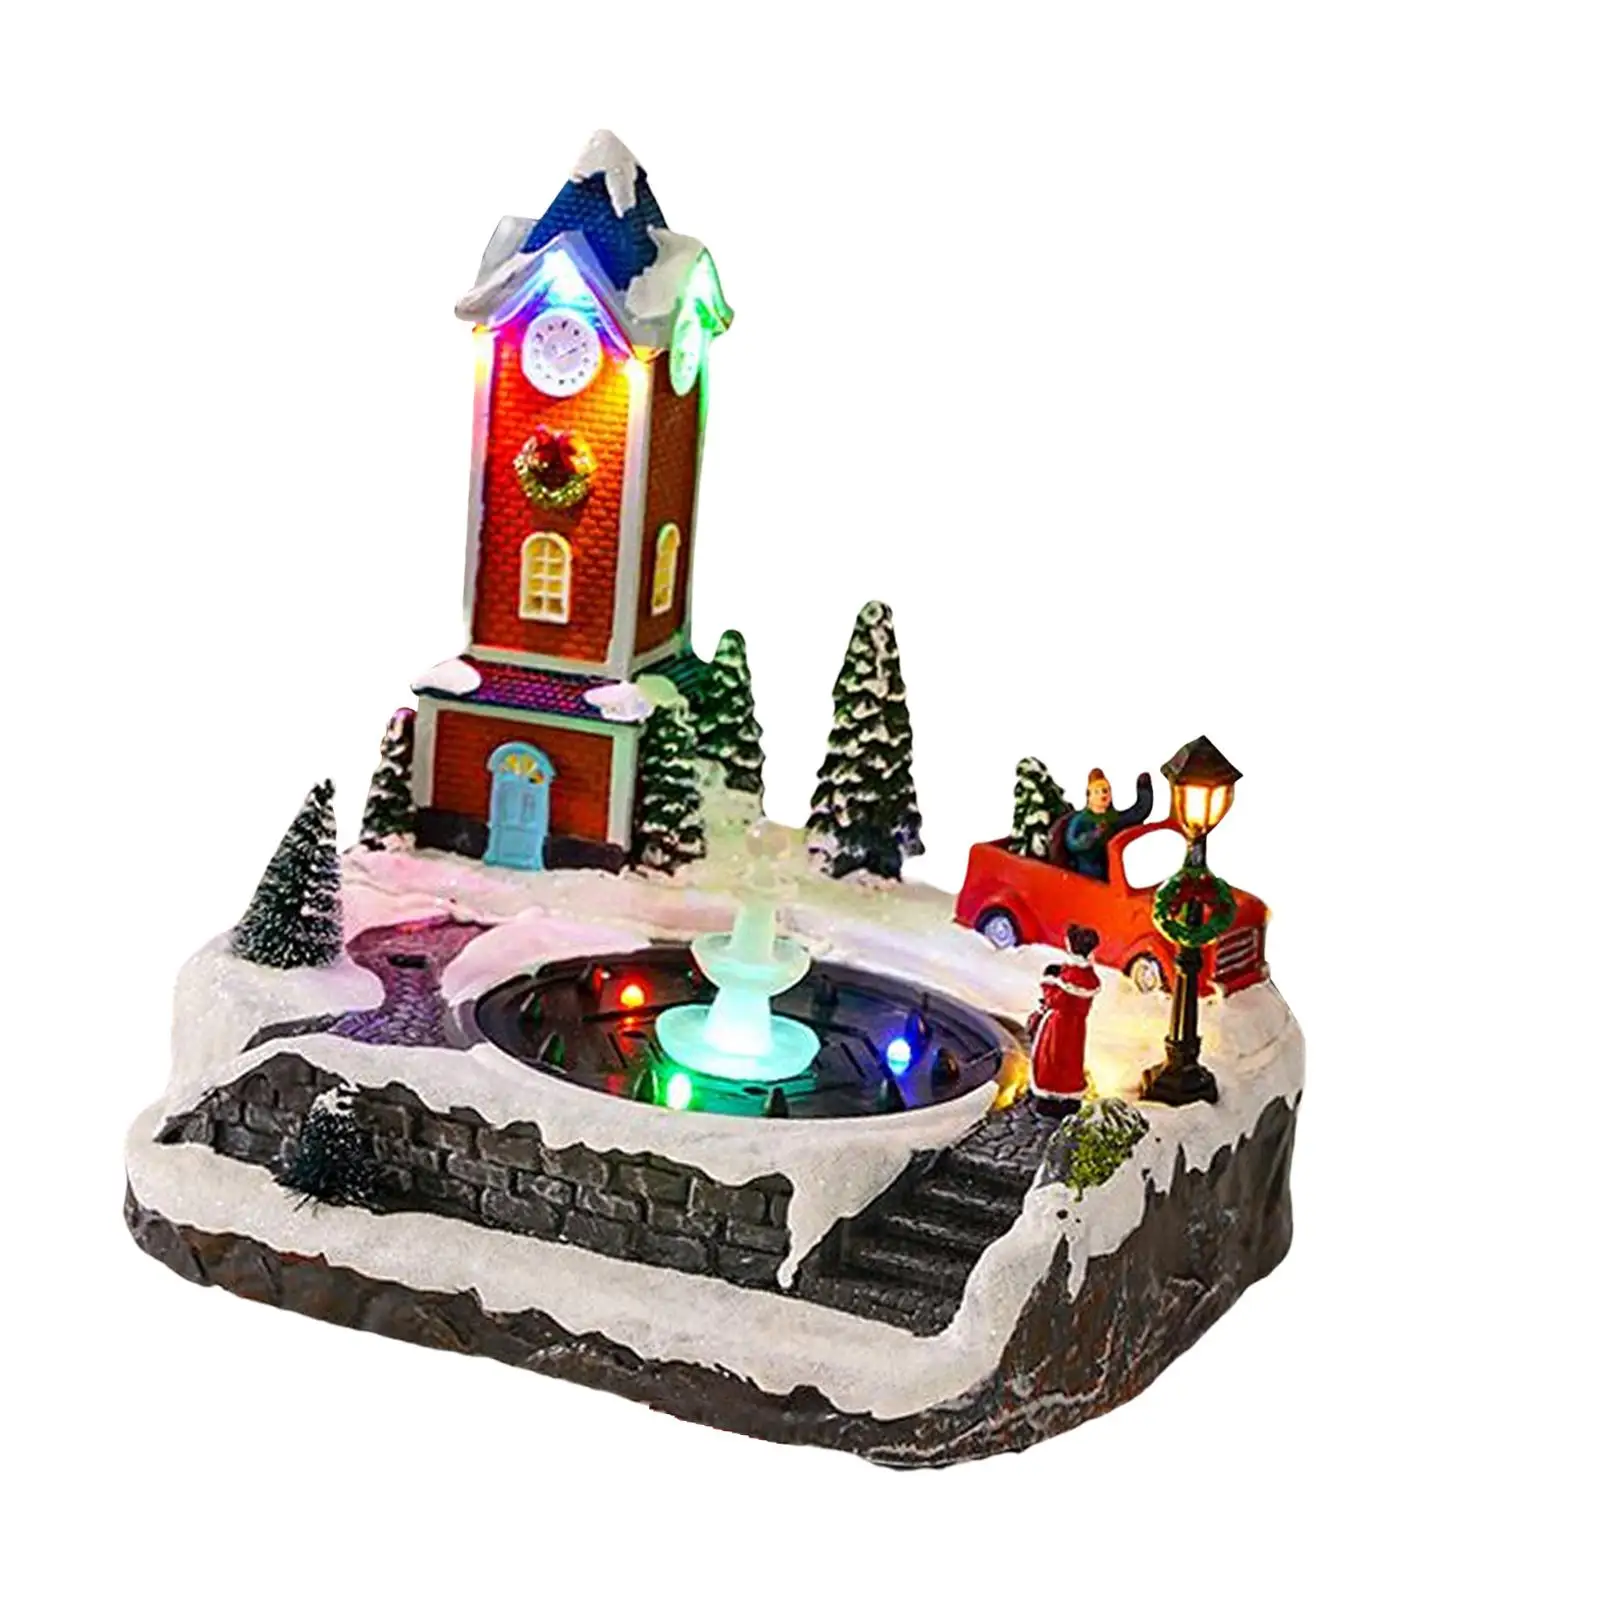 

Christmas Church Snow Village House Musical Fountain USB Battery Powered Sculpture for Living Room Tabletop Indoor Decoration